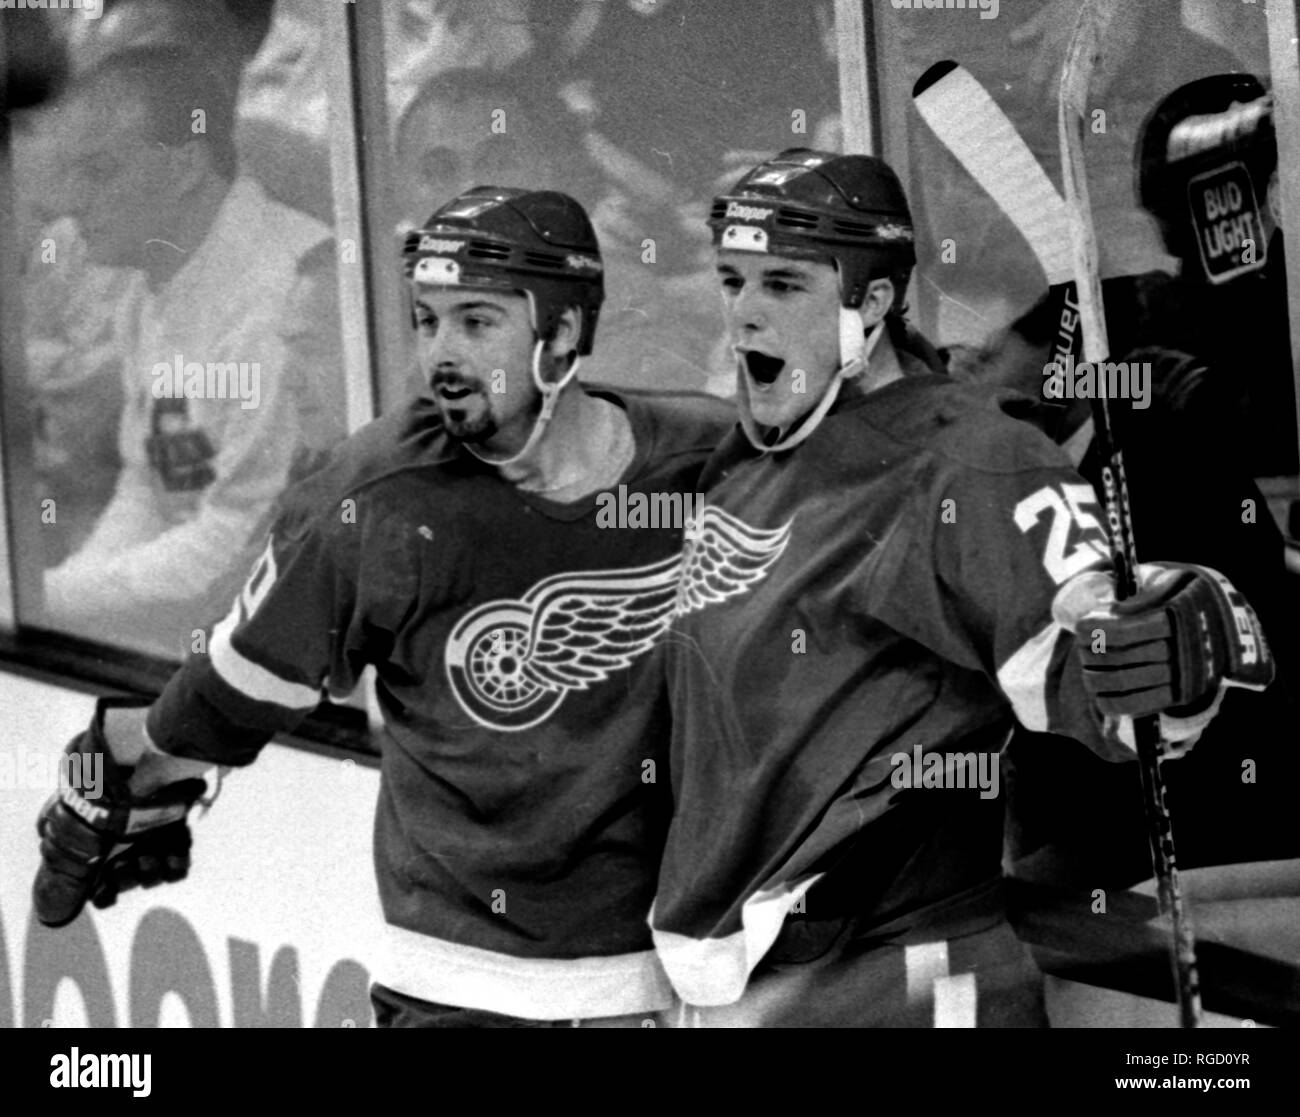 Detroit Red Wings #20Martin Lapointe (left) and #25 Darren McCarty celebrate the Red Wings fourth goal on the Boston Bruins in game action at the Fleet Center in Boston Ma USA Nov.2, 1995 photo by bill belknap Stock Photo